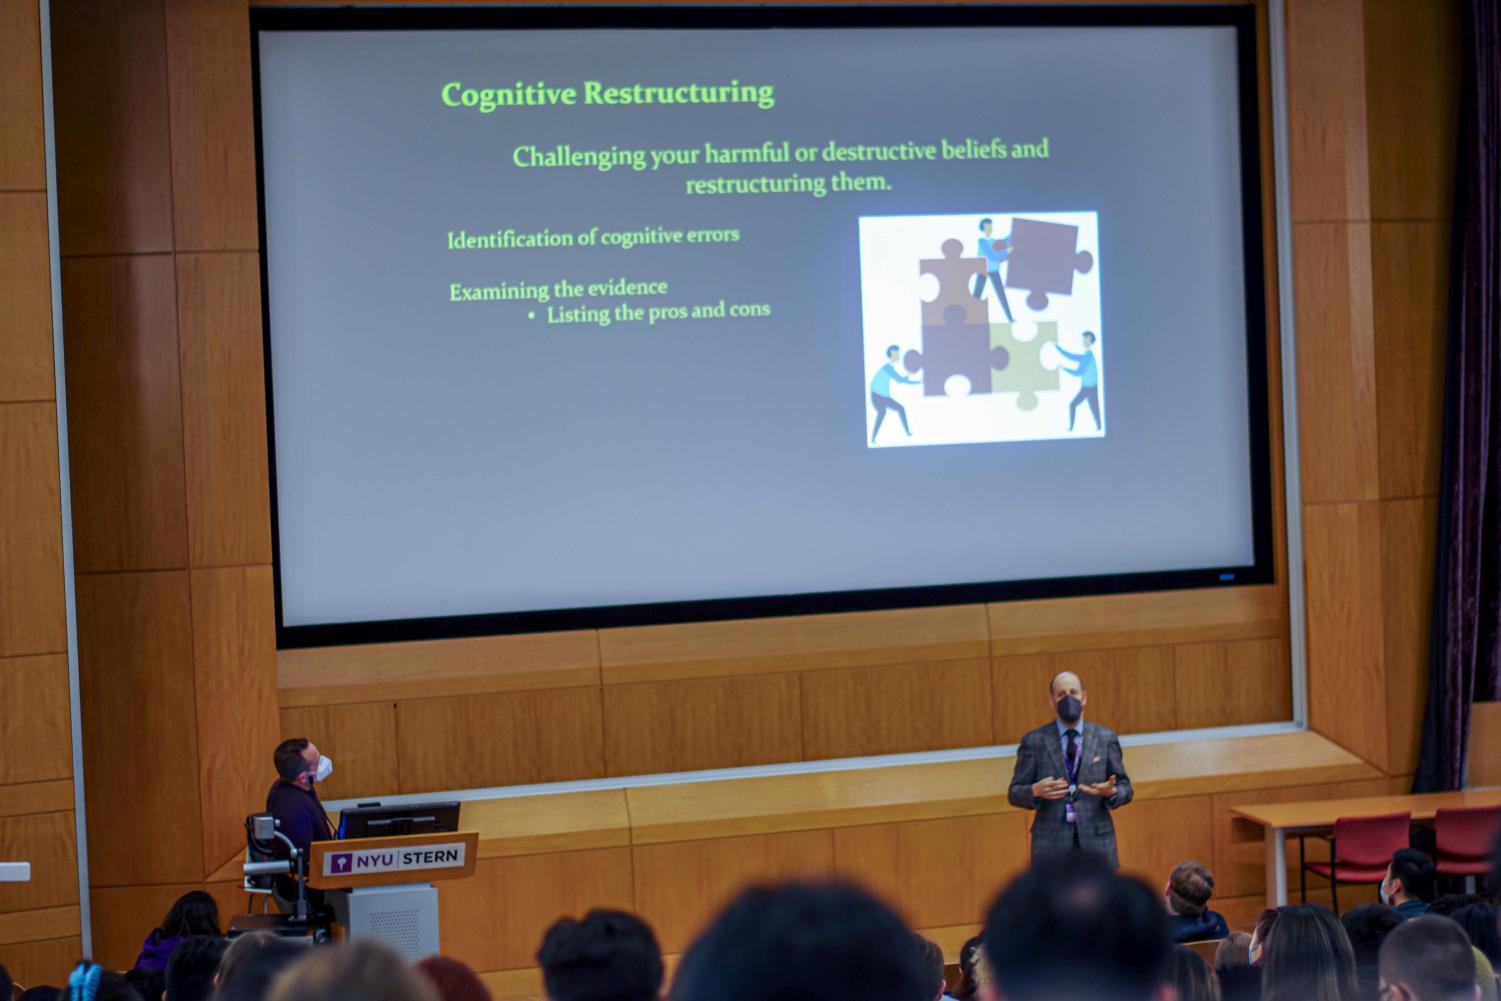 A large lecture hall full of students. On the bottom right, a professor addresses the class. On the bottom left, a course assistant sits behind a podium. Above them, a slide presentation is displayed on a large screen with information about cognitive restructuring.